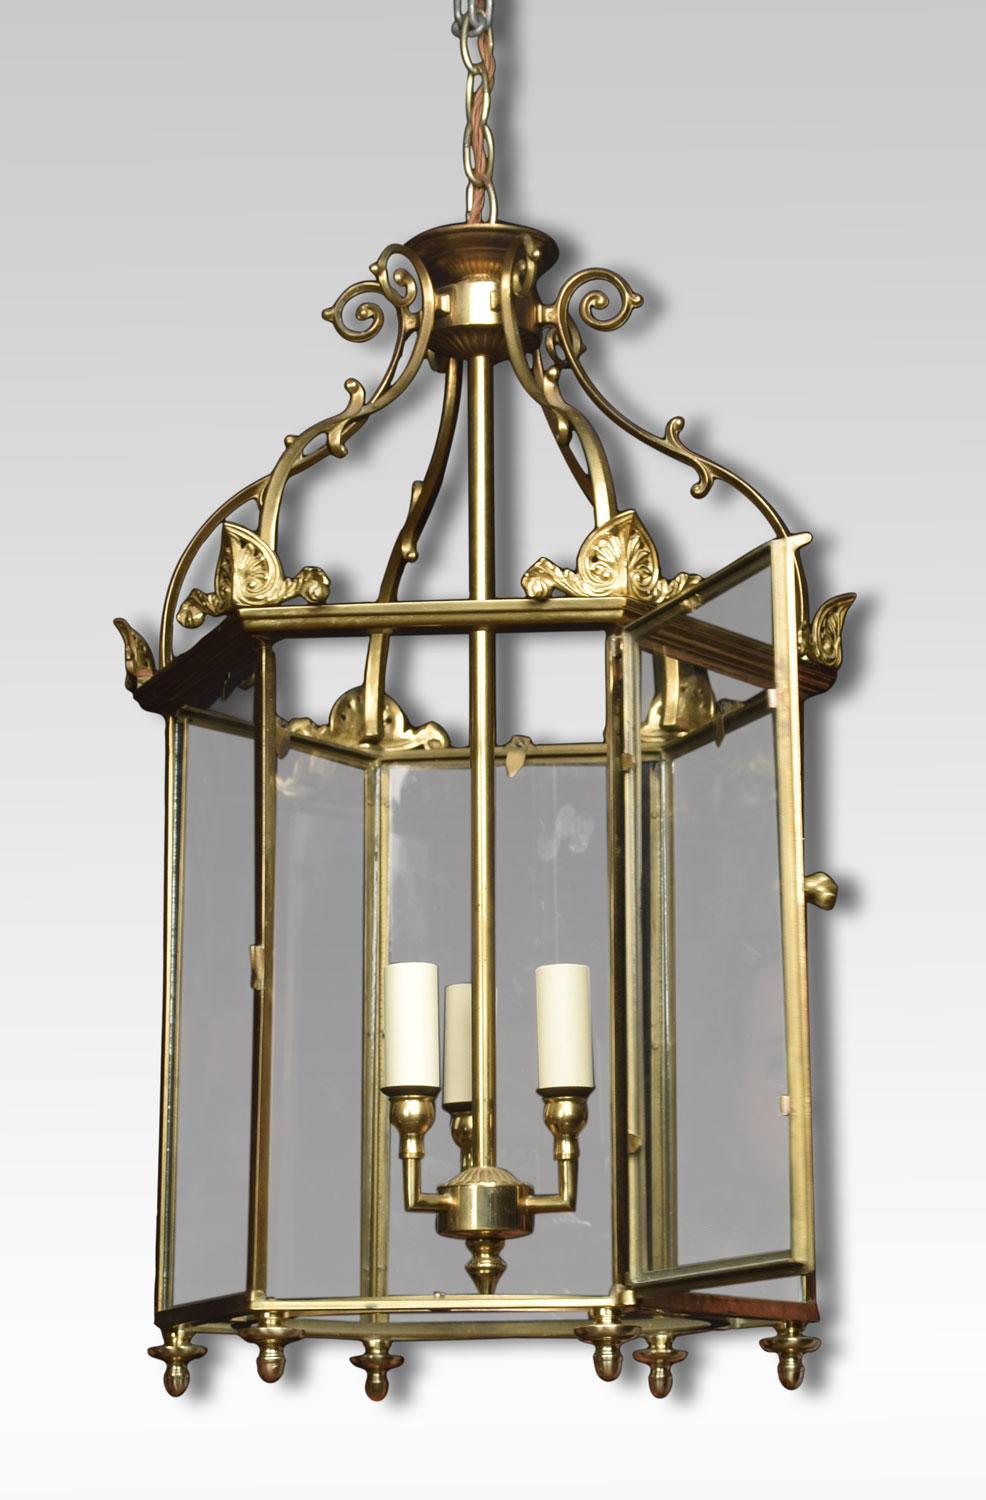 Hexagonal brass hall lantern of George III style with six scrolled ribs and glazed panels enclosing three lights. The lantern has been rewired.
Dimensions:
Height 15 inches
Width 15 inches
Depth 15 inches.